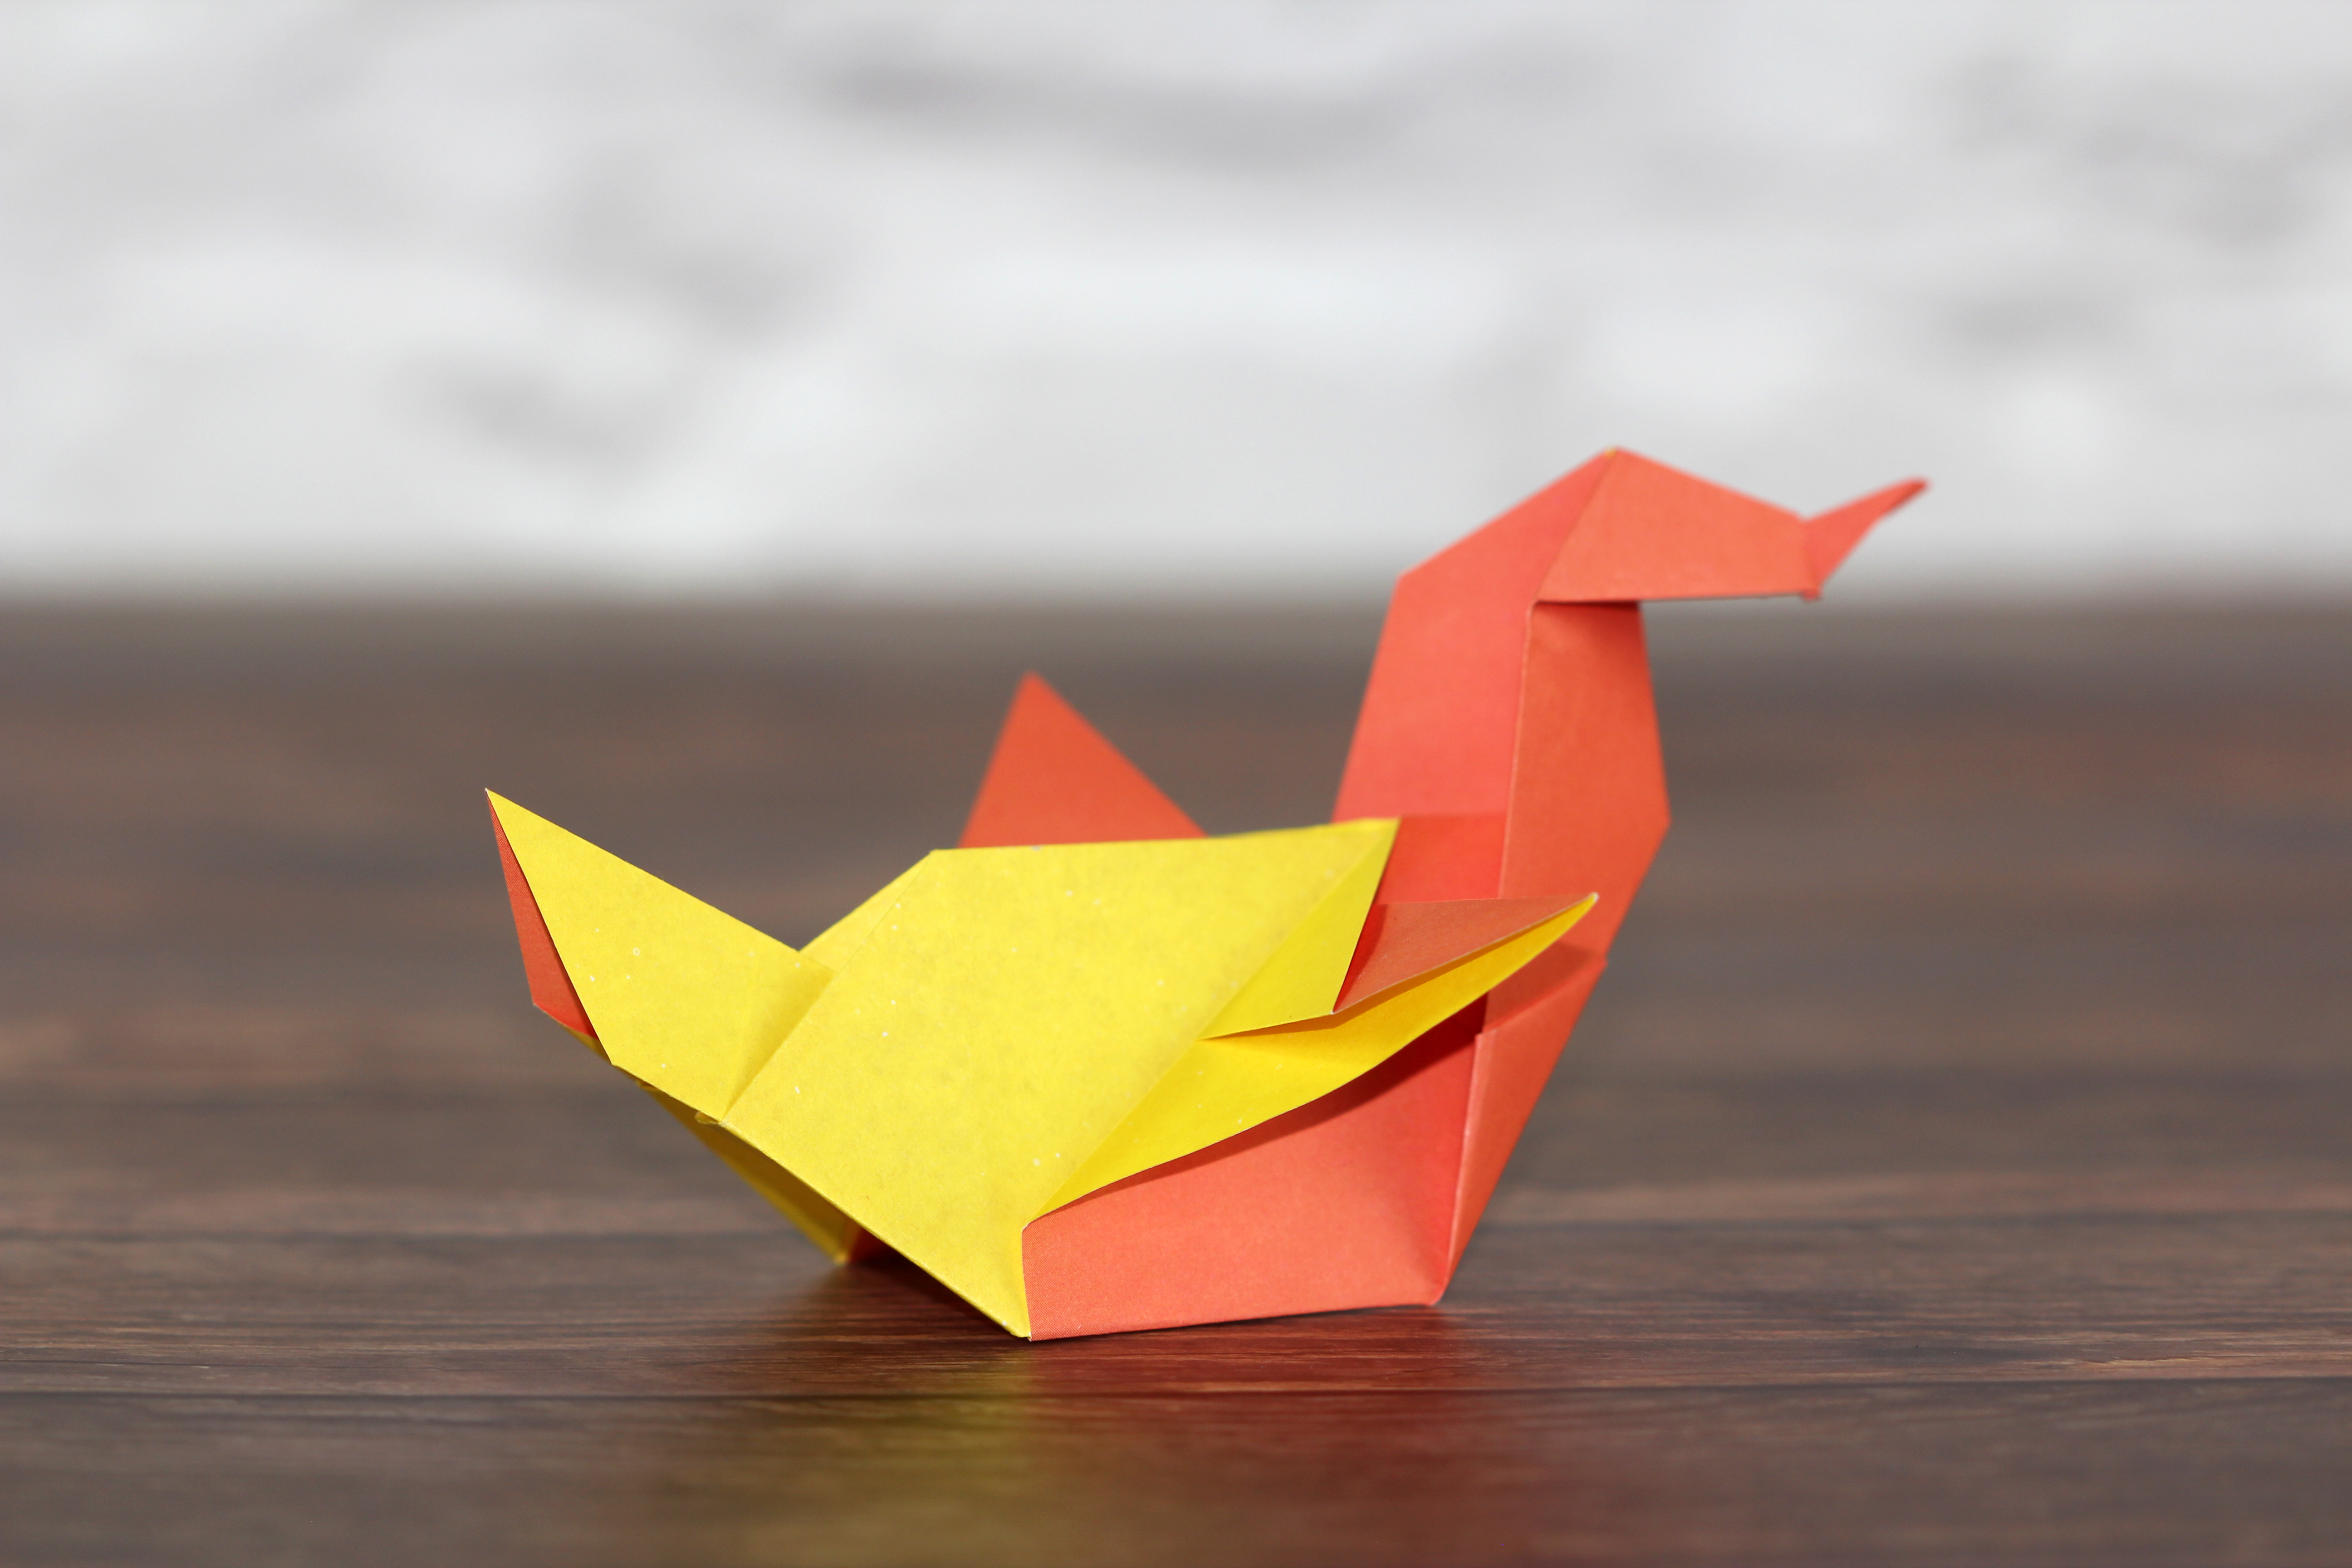 How to make an origami duck - completed origami duck, image 1